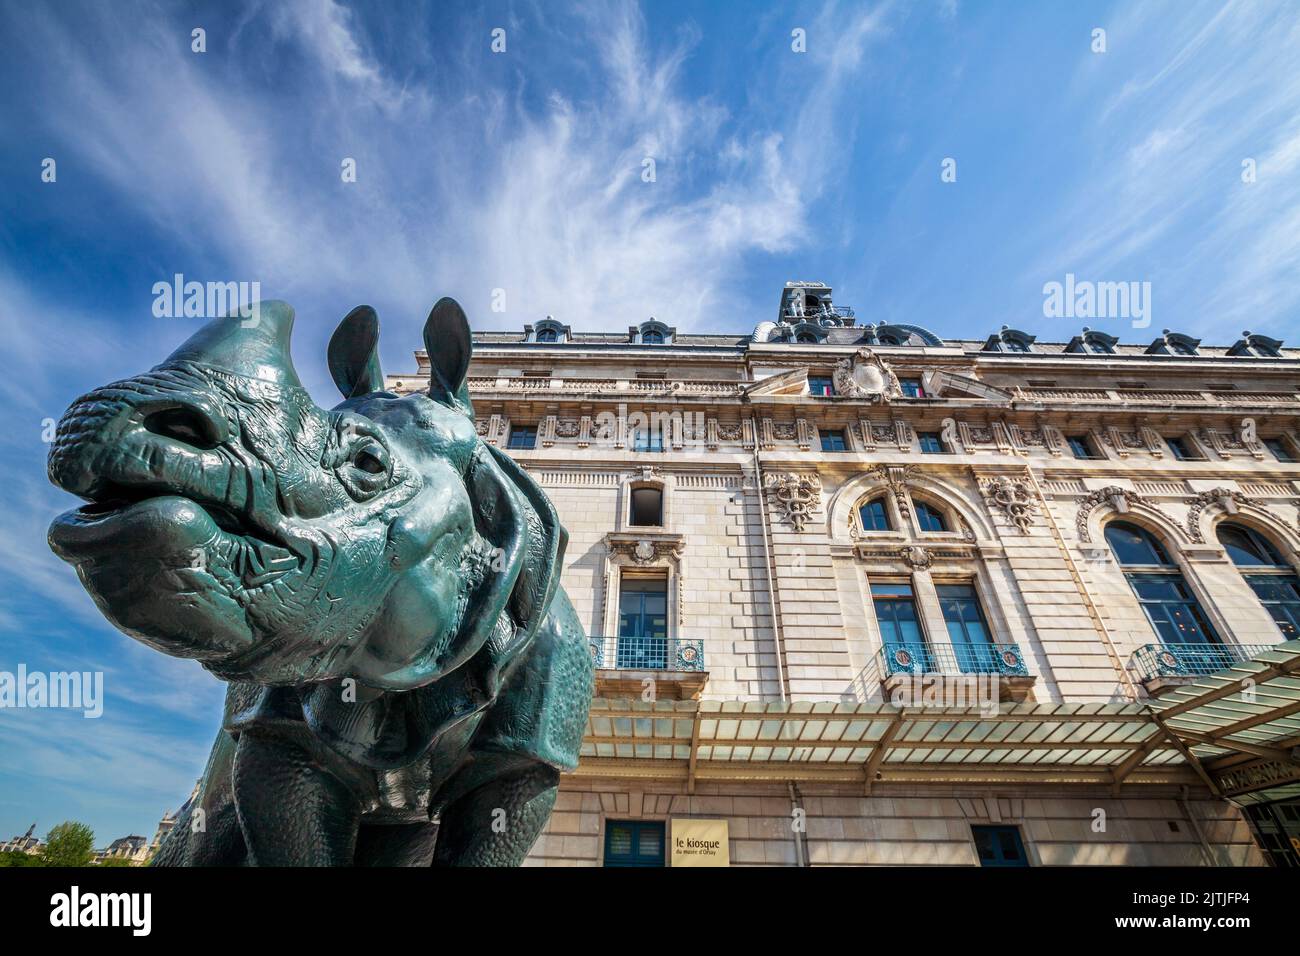 A Rhinoceros sculpture outside the Musee d'Orsay, Paris Stock Photo